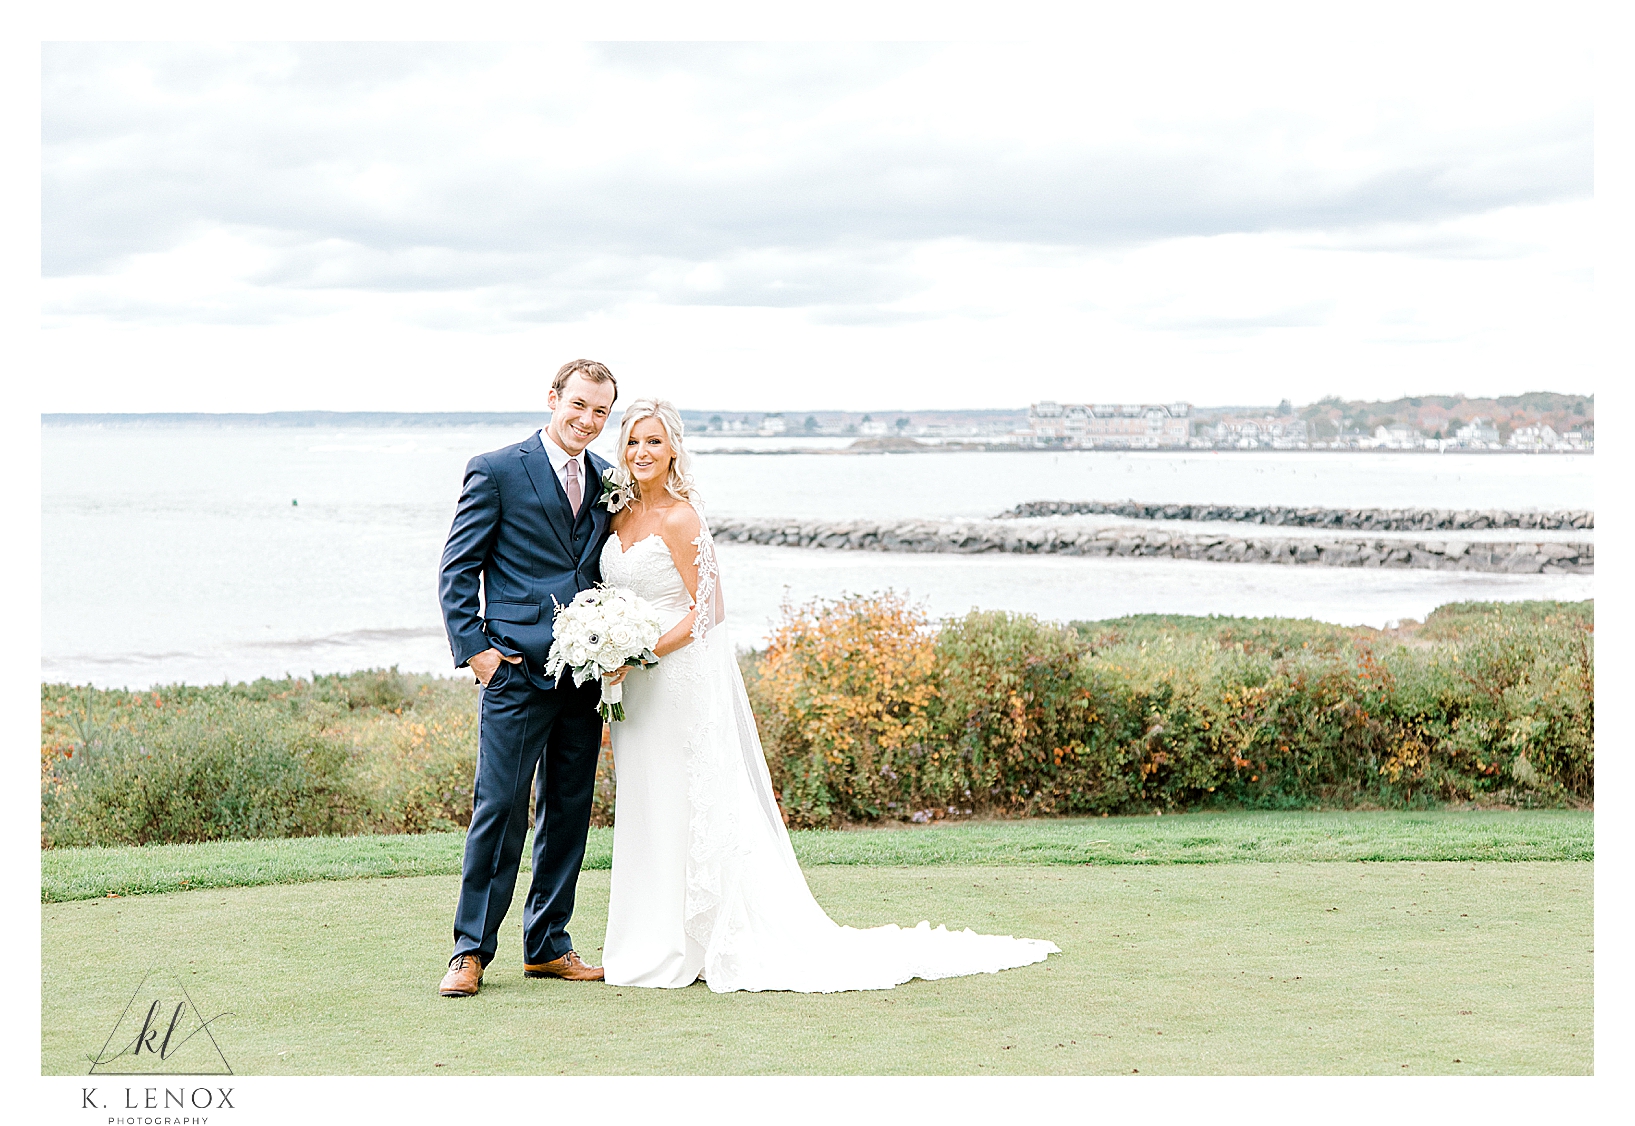 Bride and groom on their wedding day- overlooking the ocean from the Colony Hotel in Kennebunkport Maine